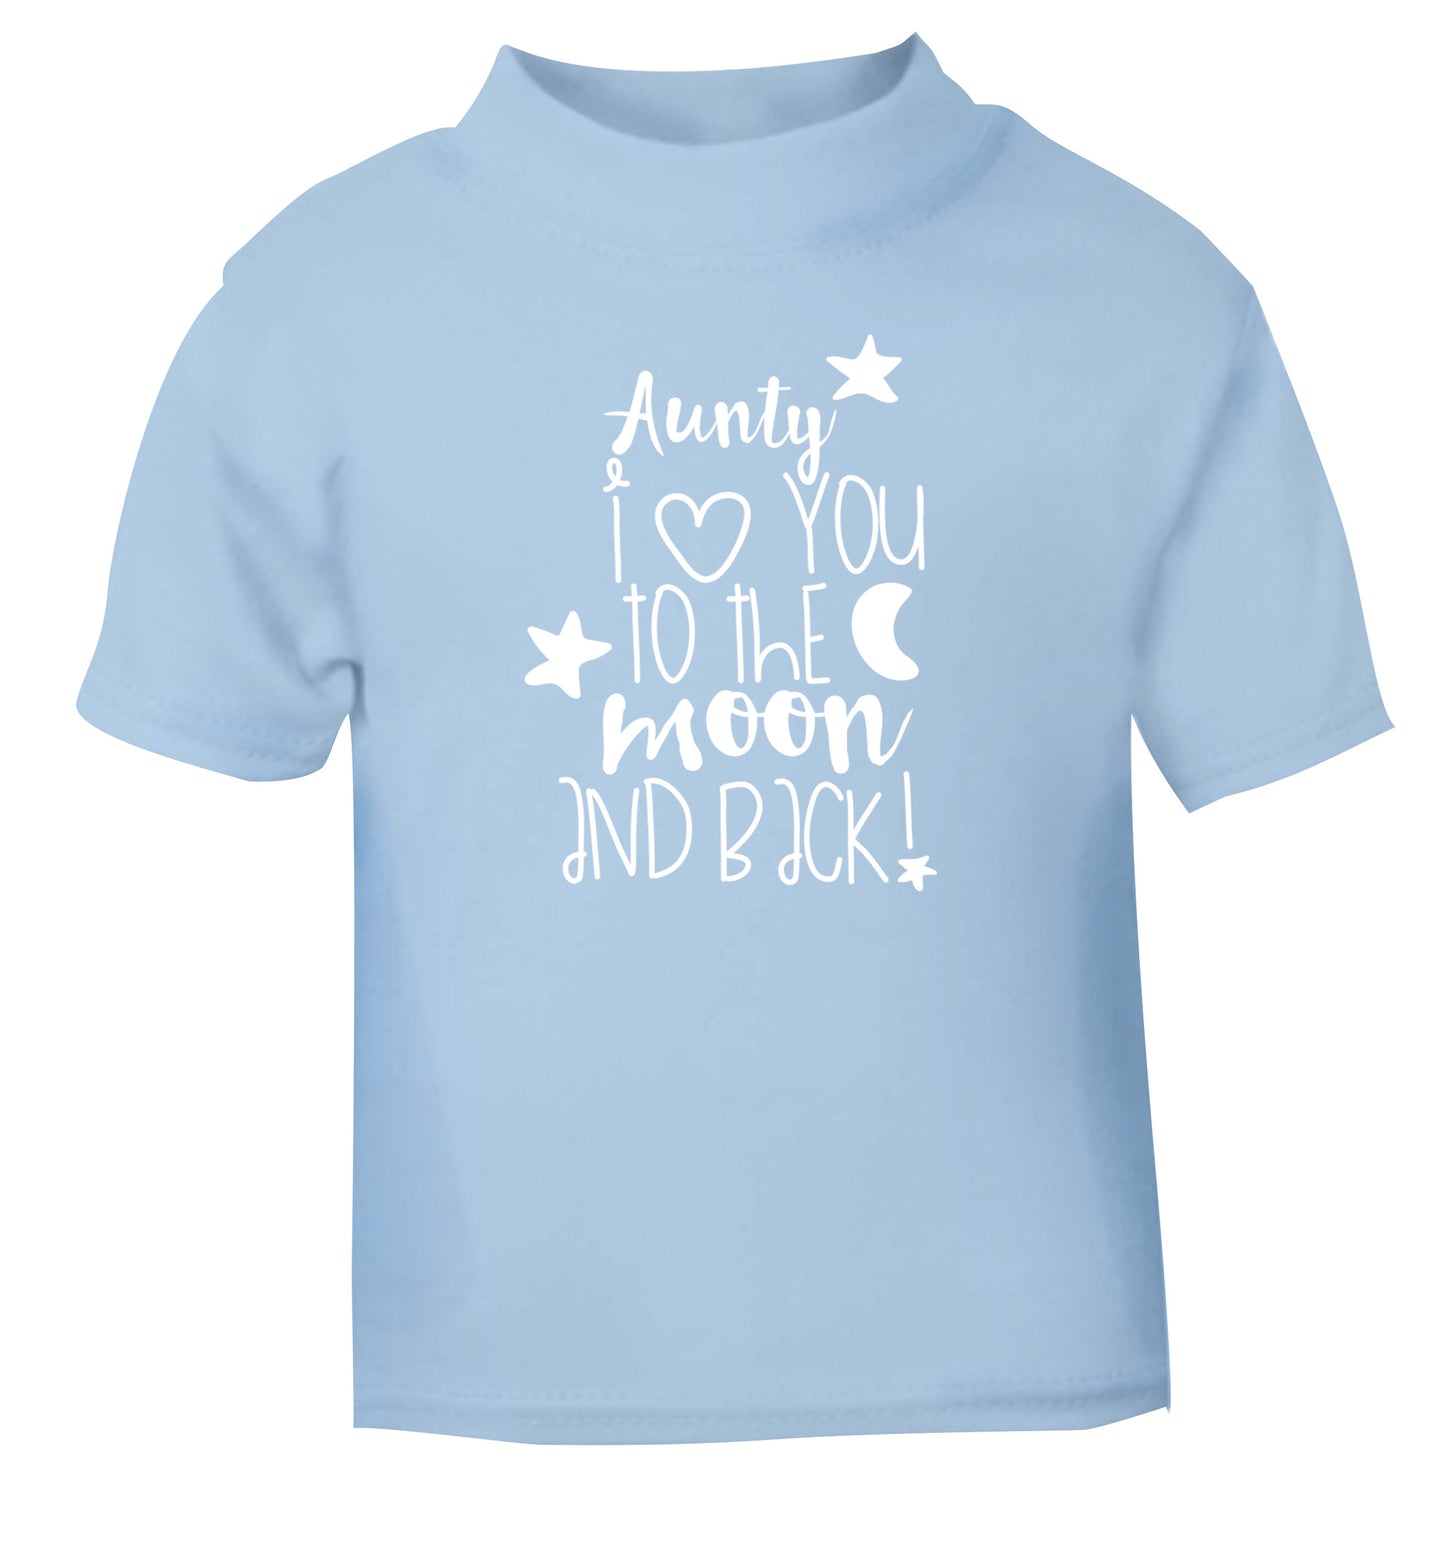 Aunty I love you to the moon and back light blue Baby Toddler Tshirt 2 Years